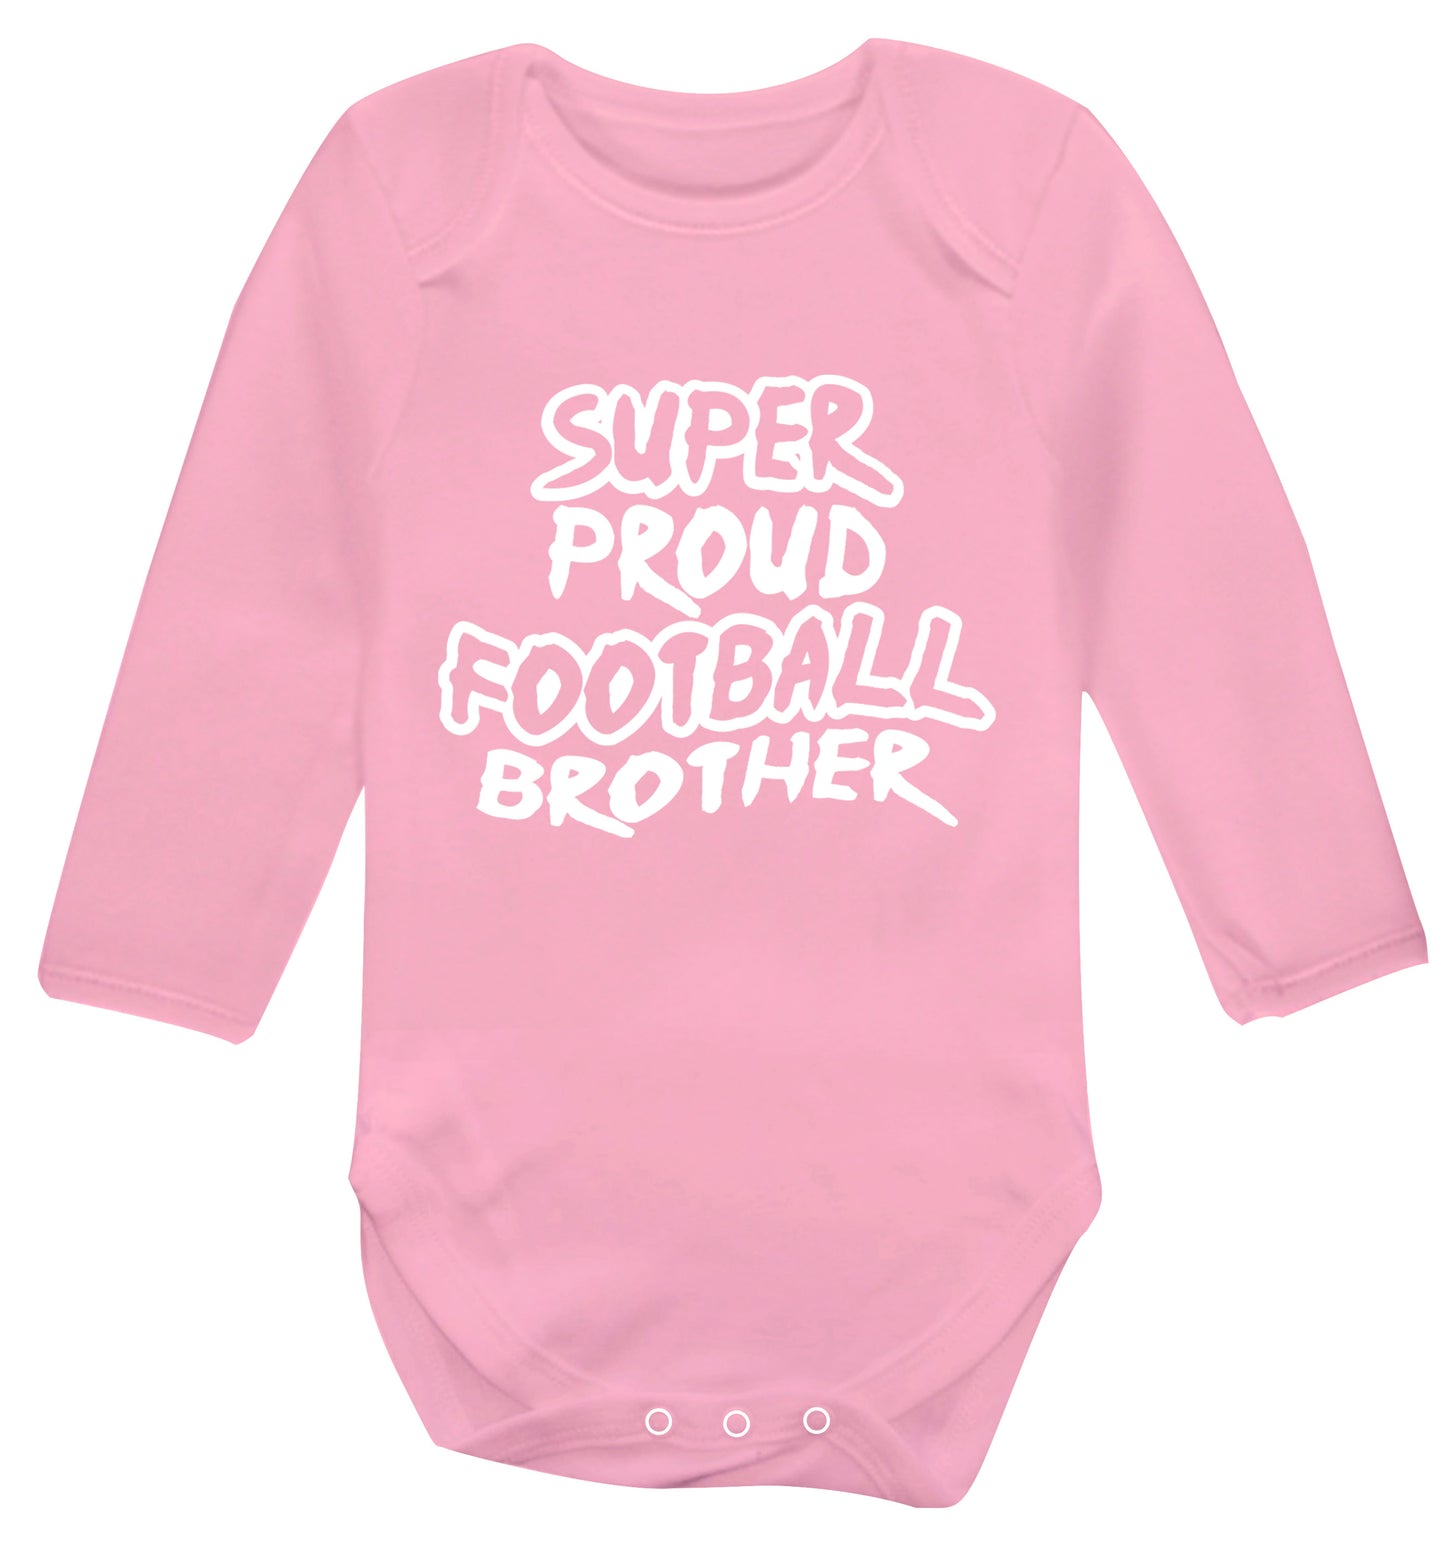 Super proud football brother Baby Vest long sleeved pale pink 6-12 months